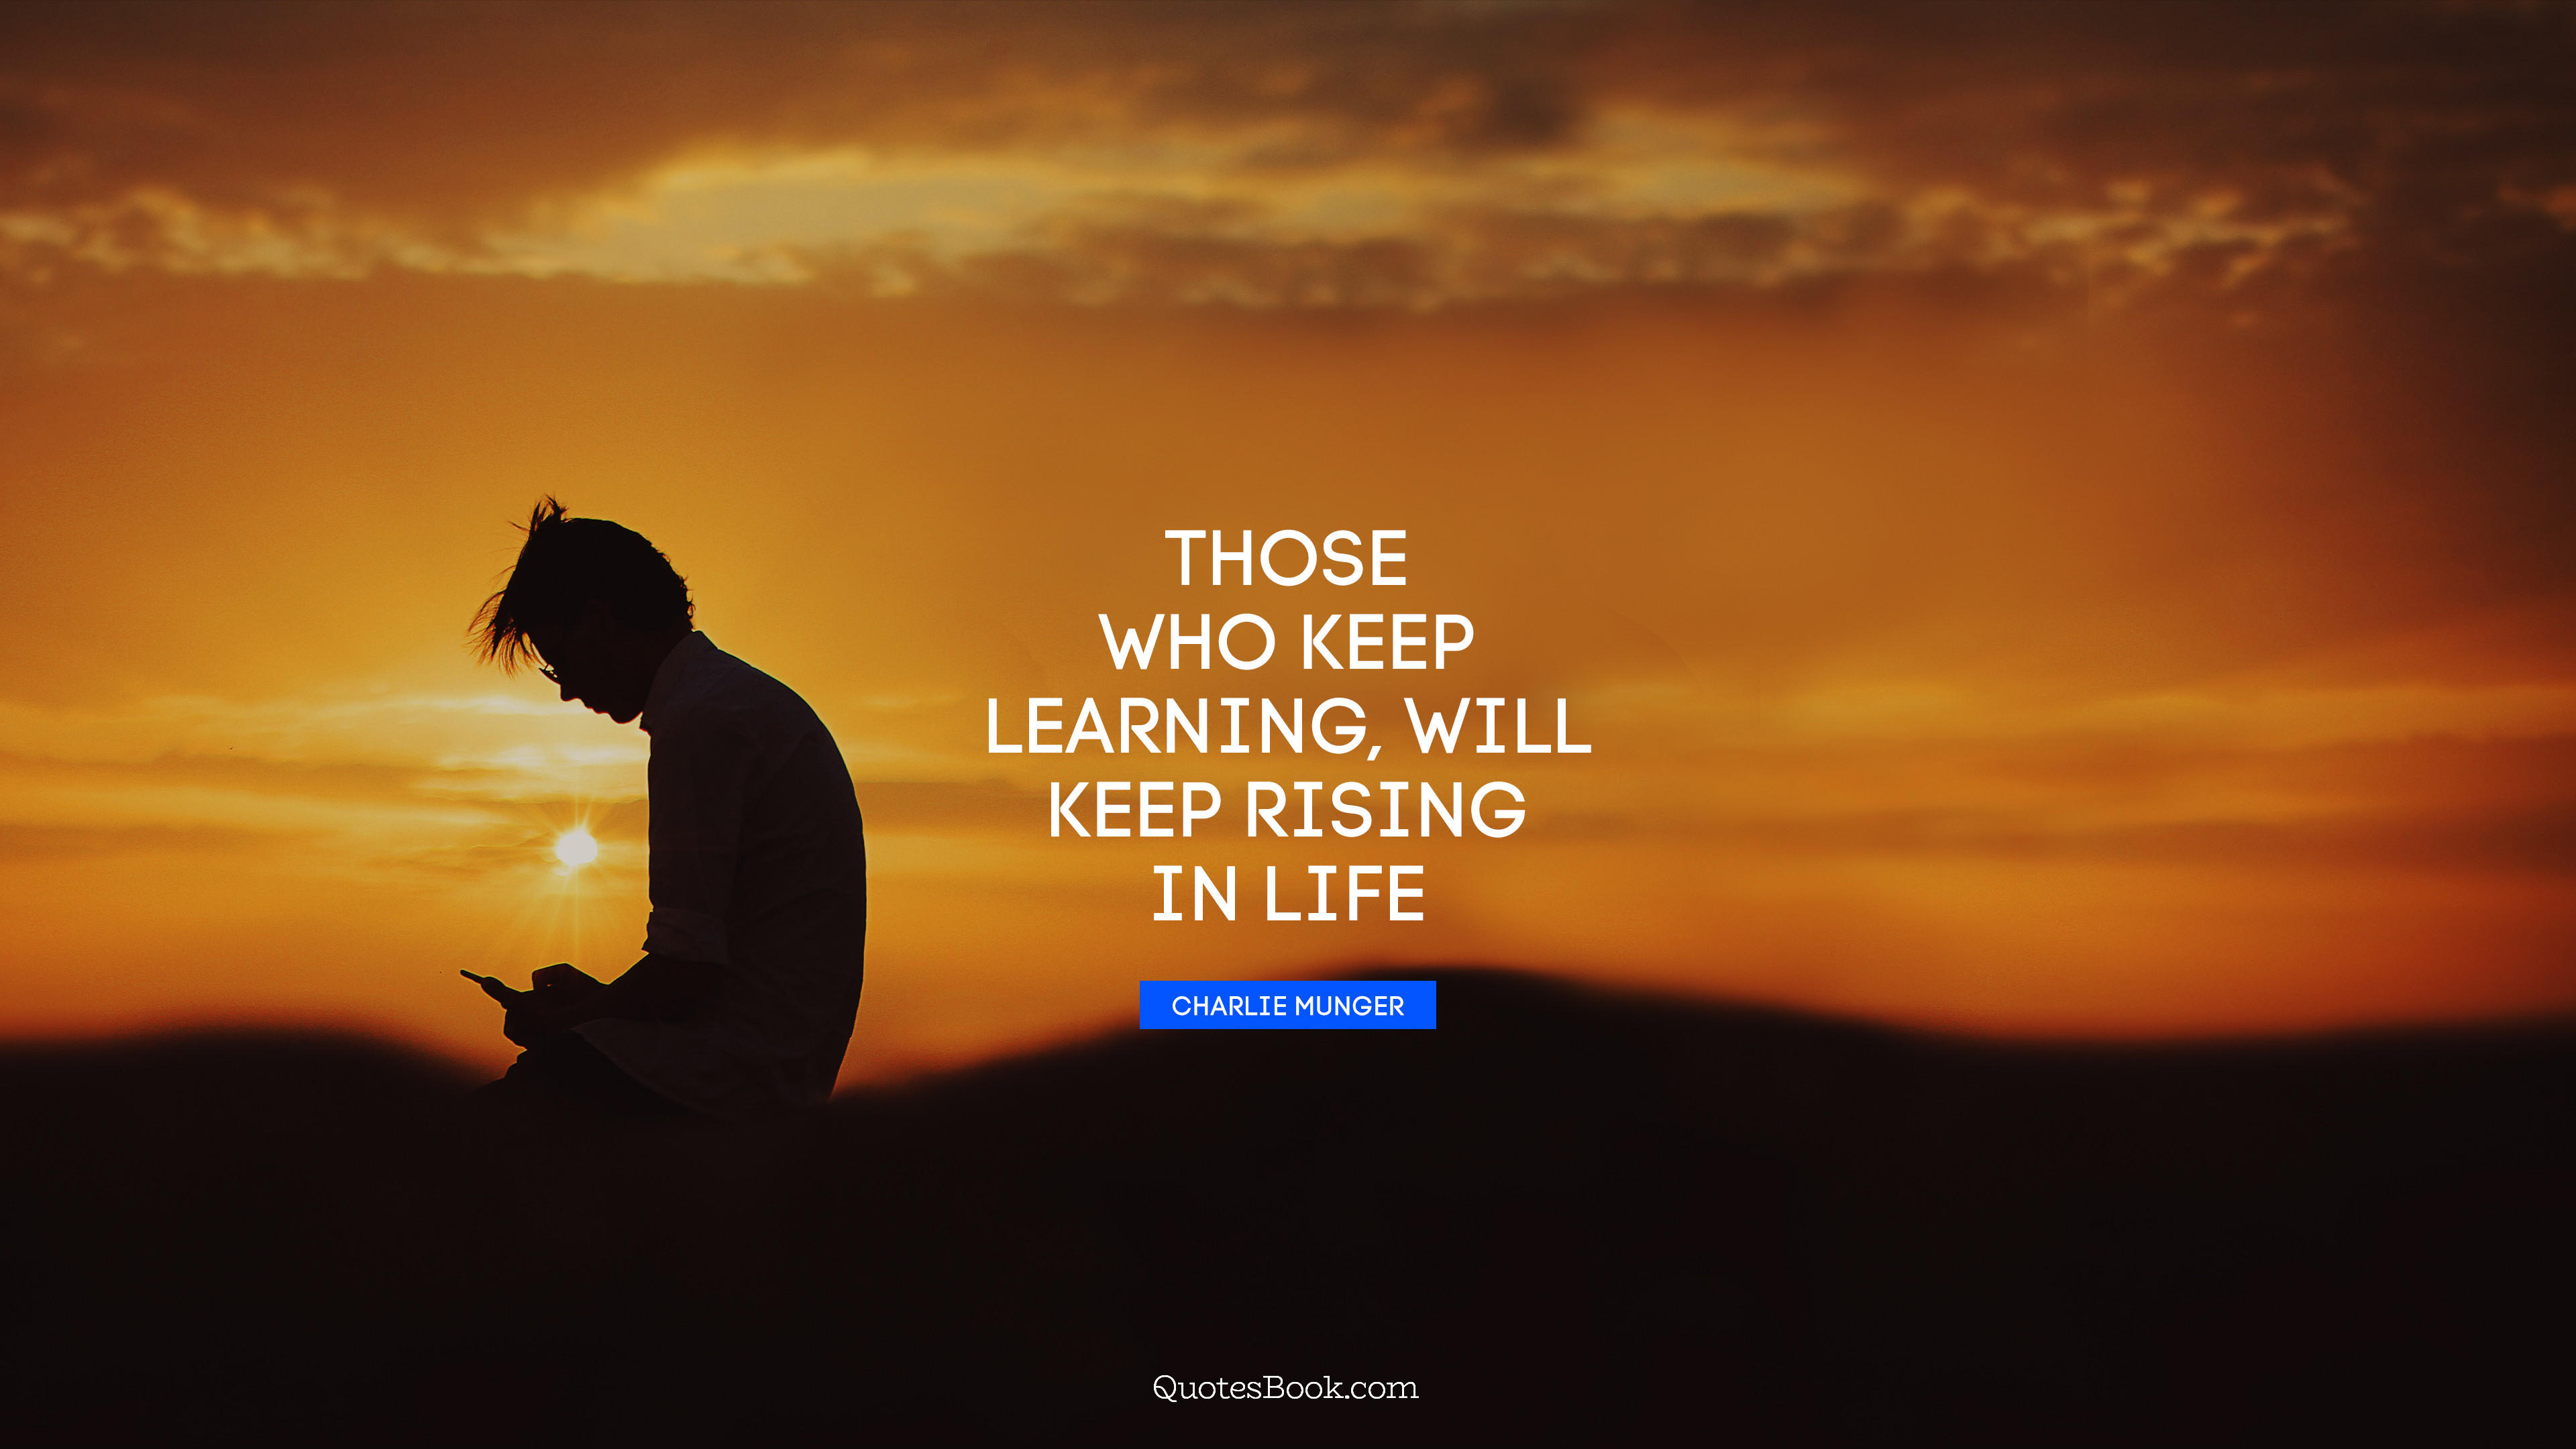 Those who keep learning, will keep rising in life. - Quote by Charlie